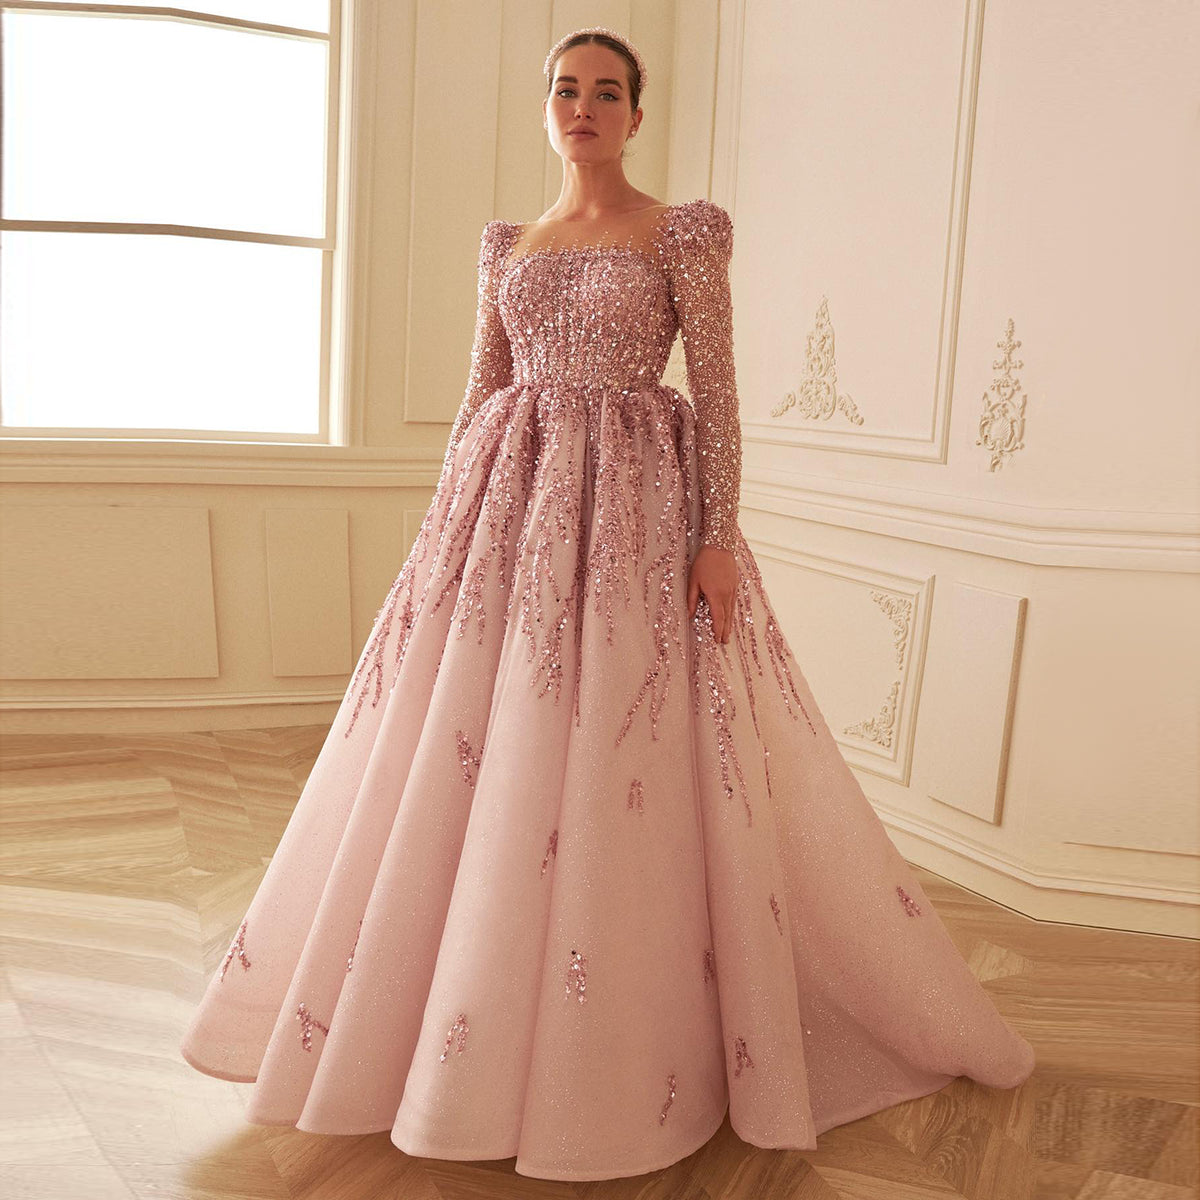 Sharon Said Dusty Pink Long Sleeves Dubai Luxury Evening Dresses for Women Wedding Party Arabic Muslim Formal Prom Gowns SS453